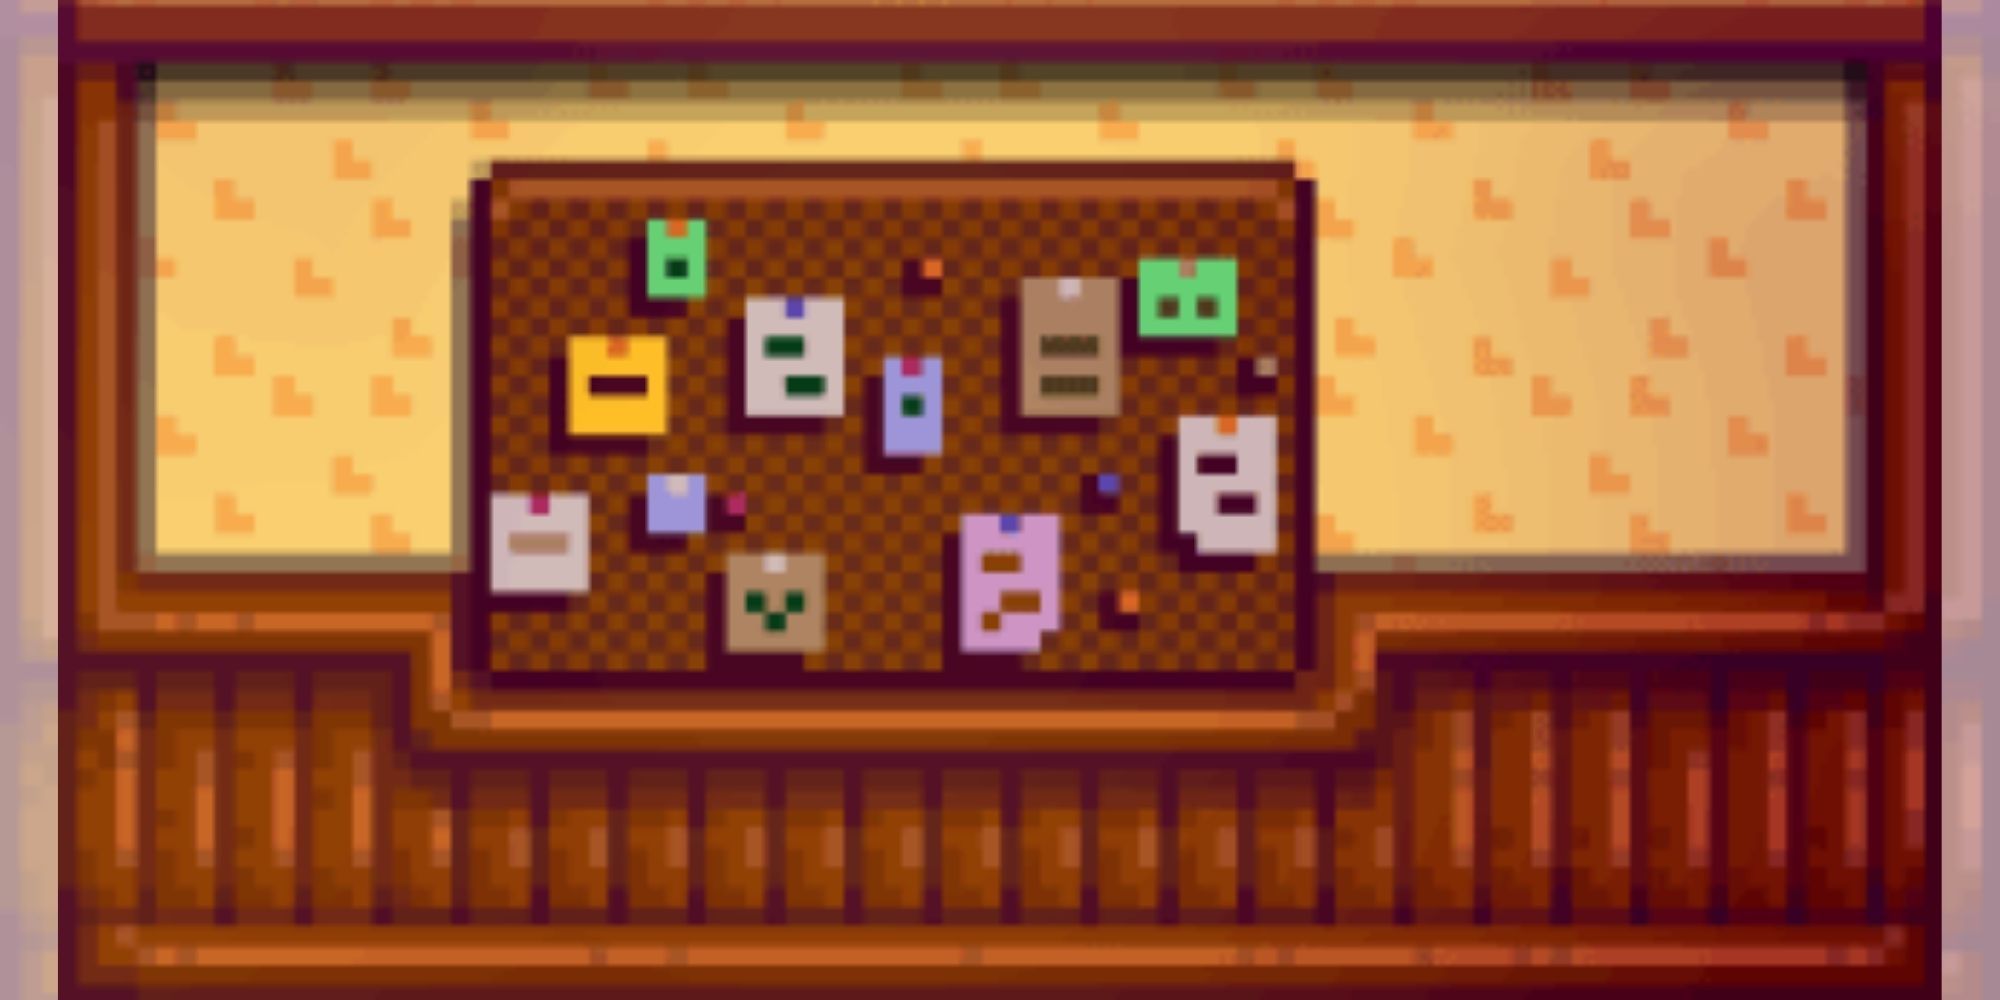 Stardew Valley Community Centre - Completed Bulletin Board